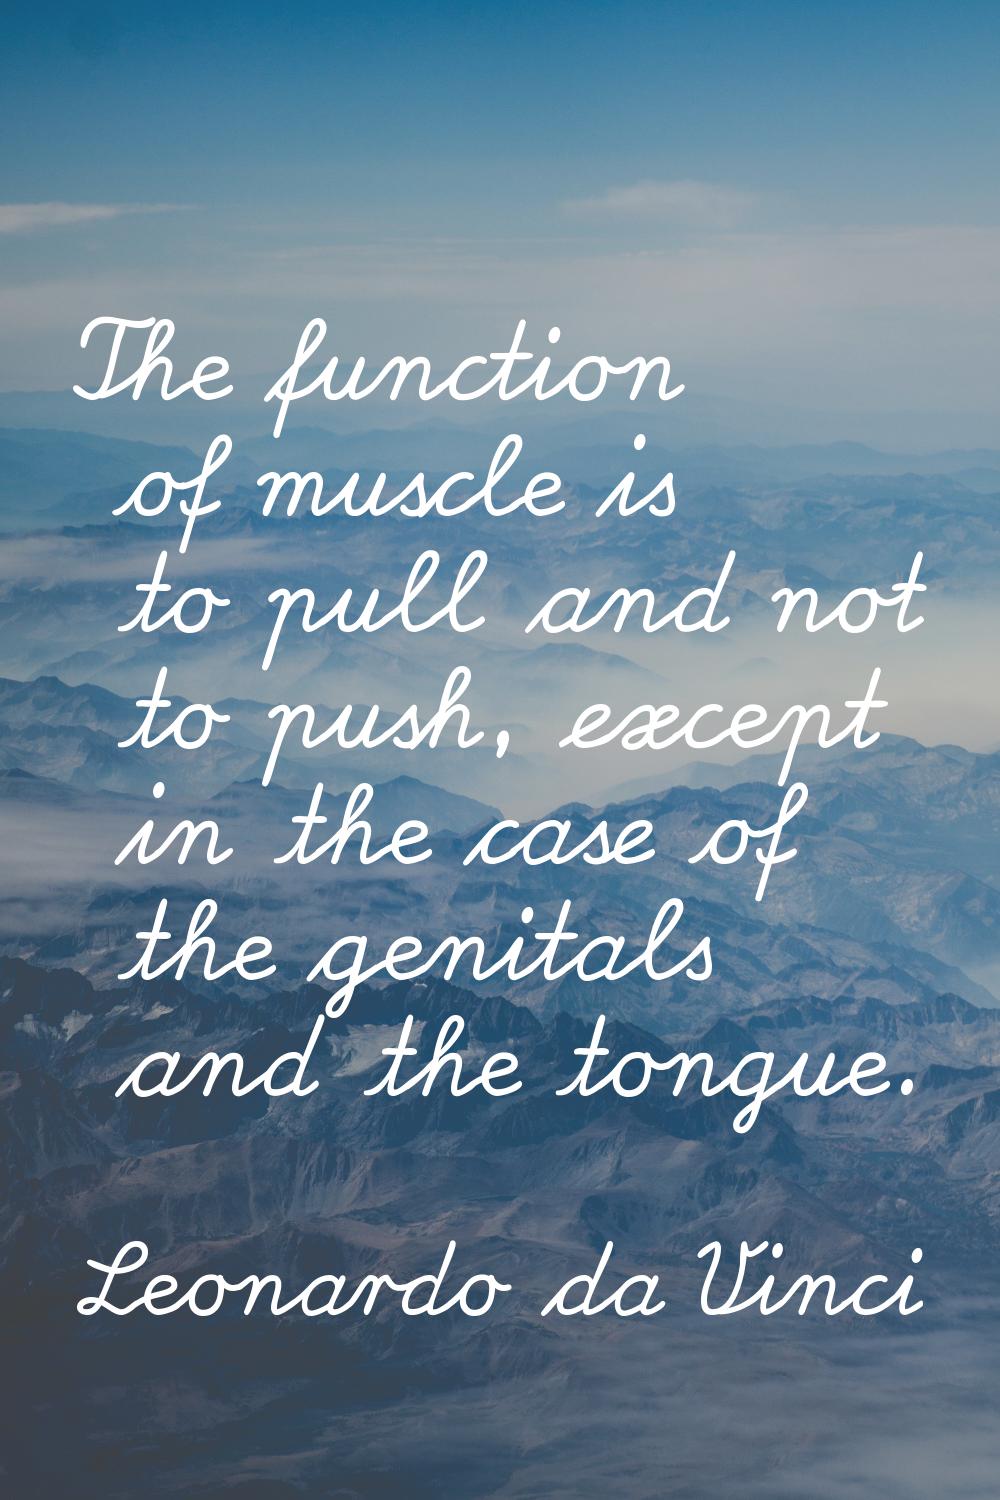 The function of muscle is to pull and not to push, except in the case of the genitals and the tongu